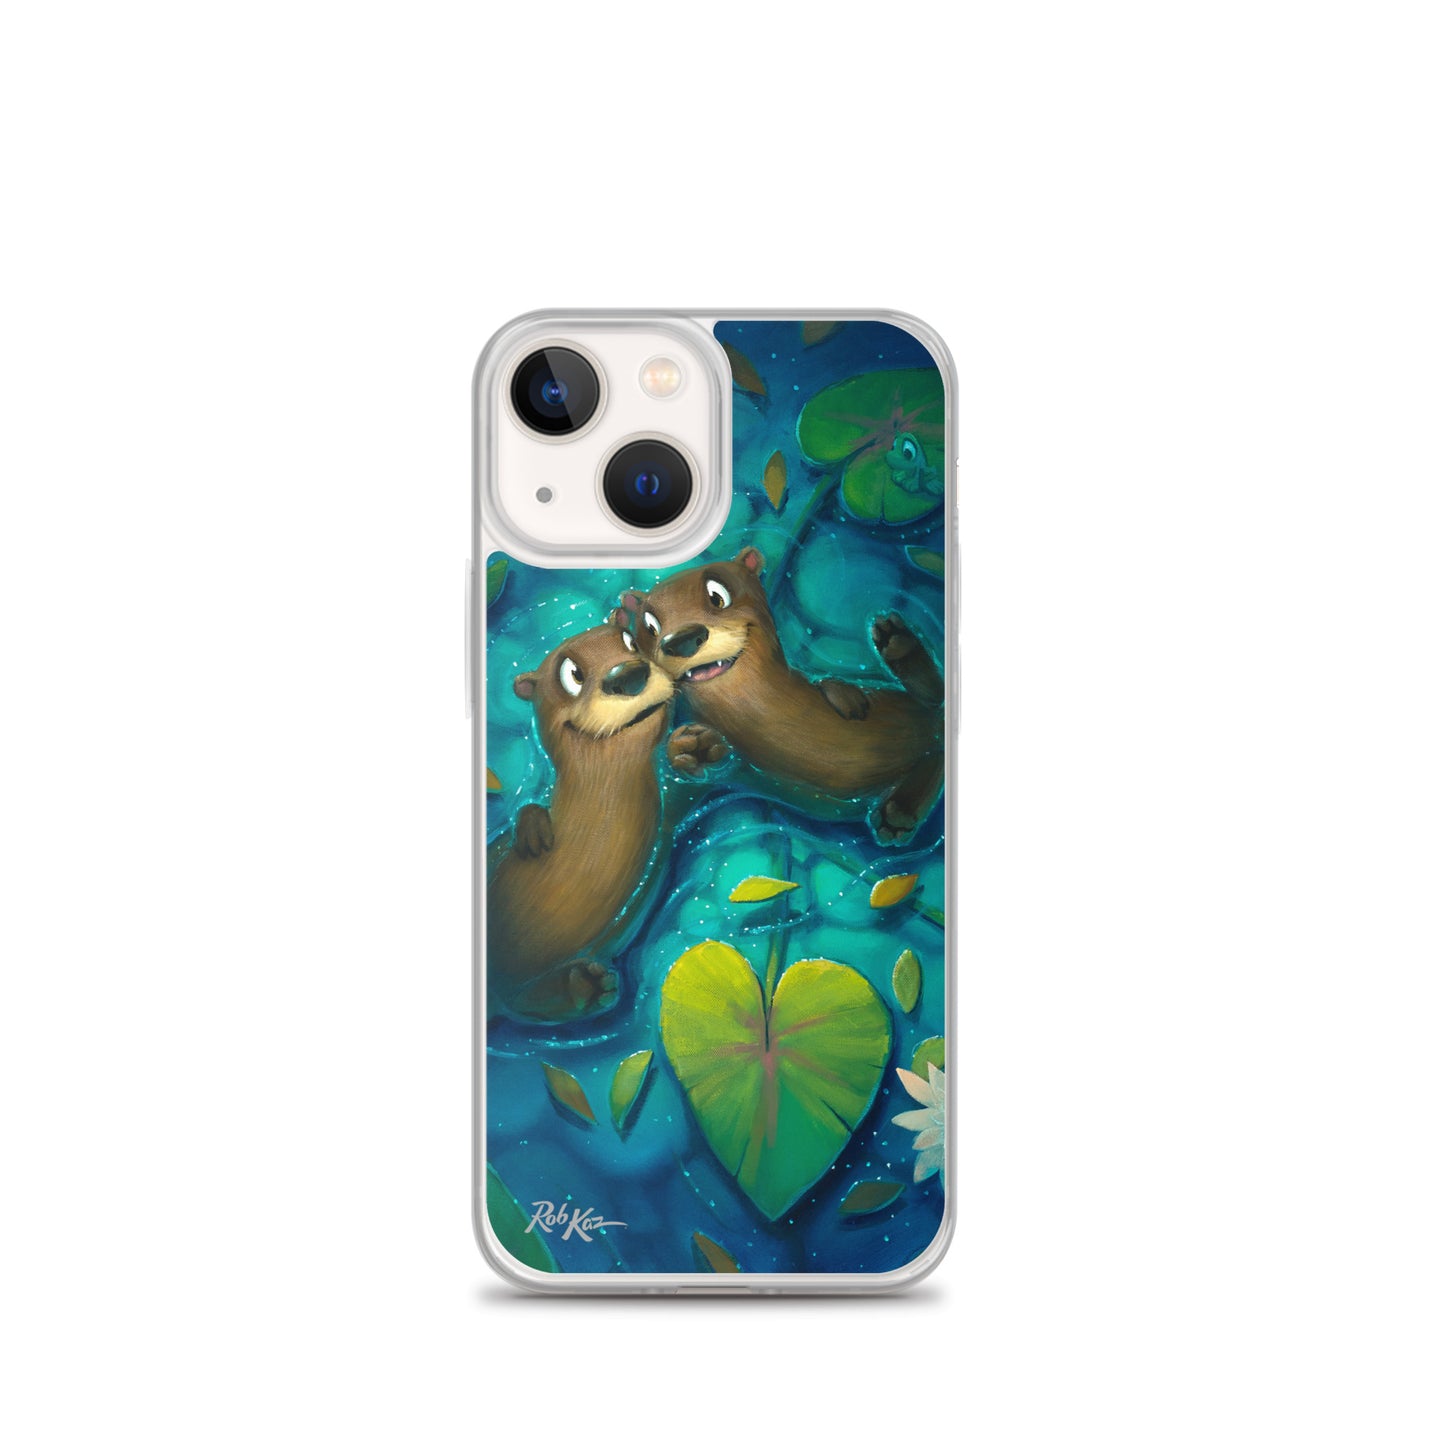 iPhone case featuring Significant Otter by Rob Kaz